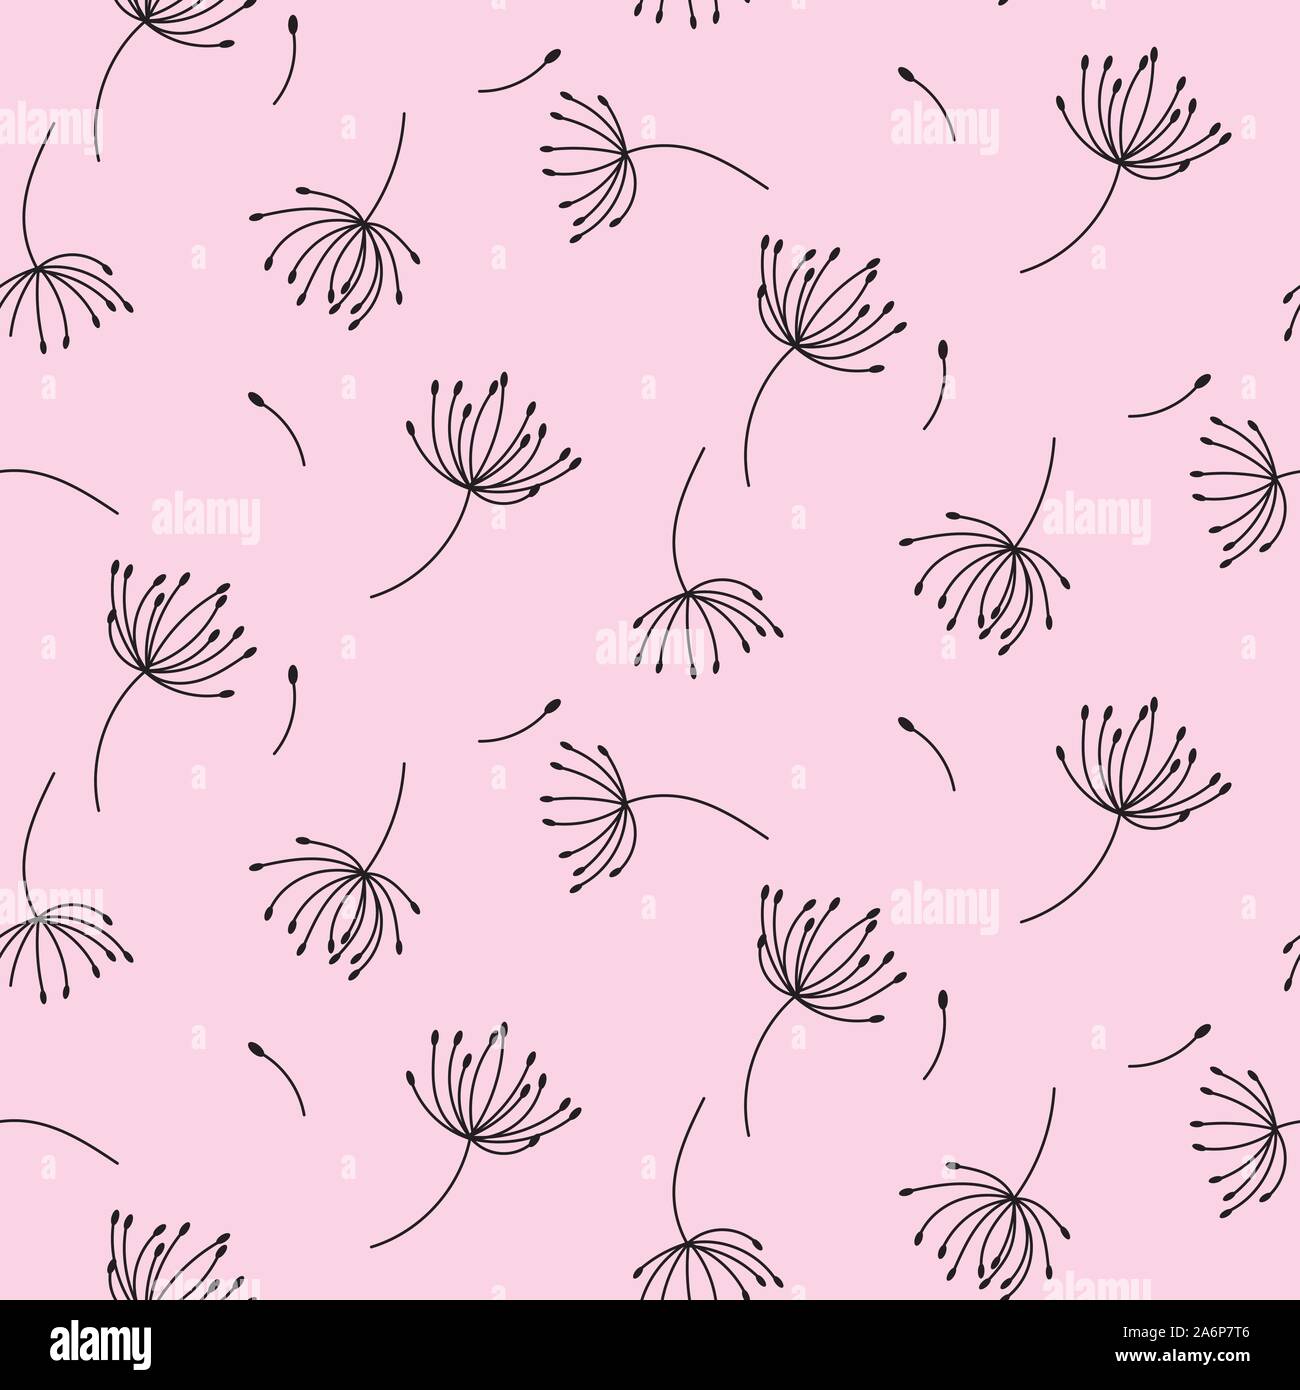 Simple dandelions on pink seamless pattern background. Stock Vector